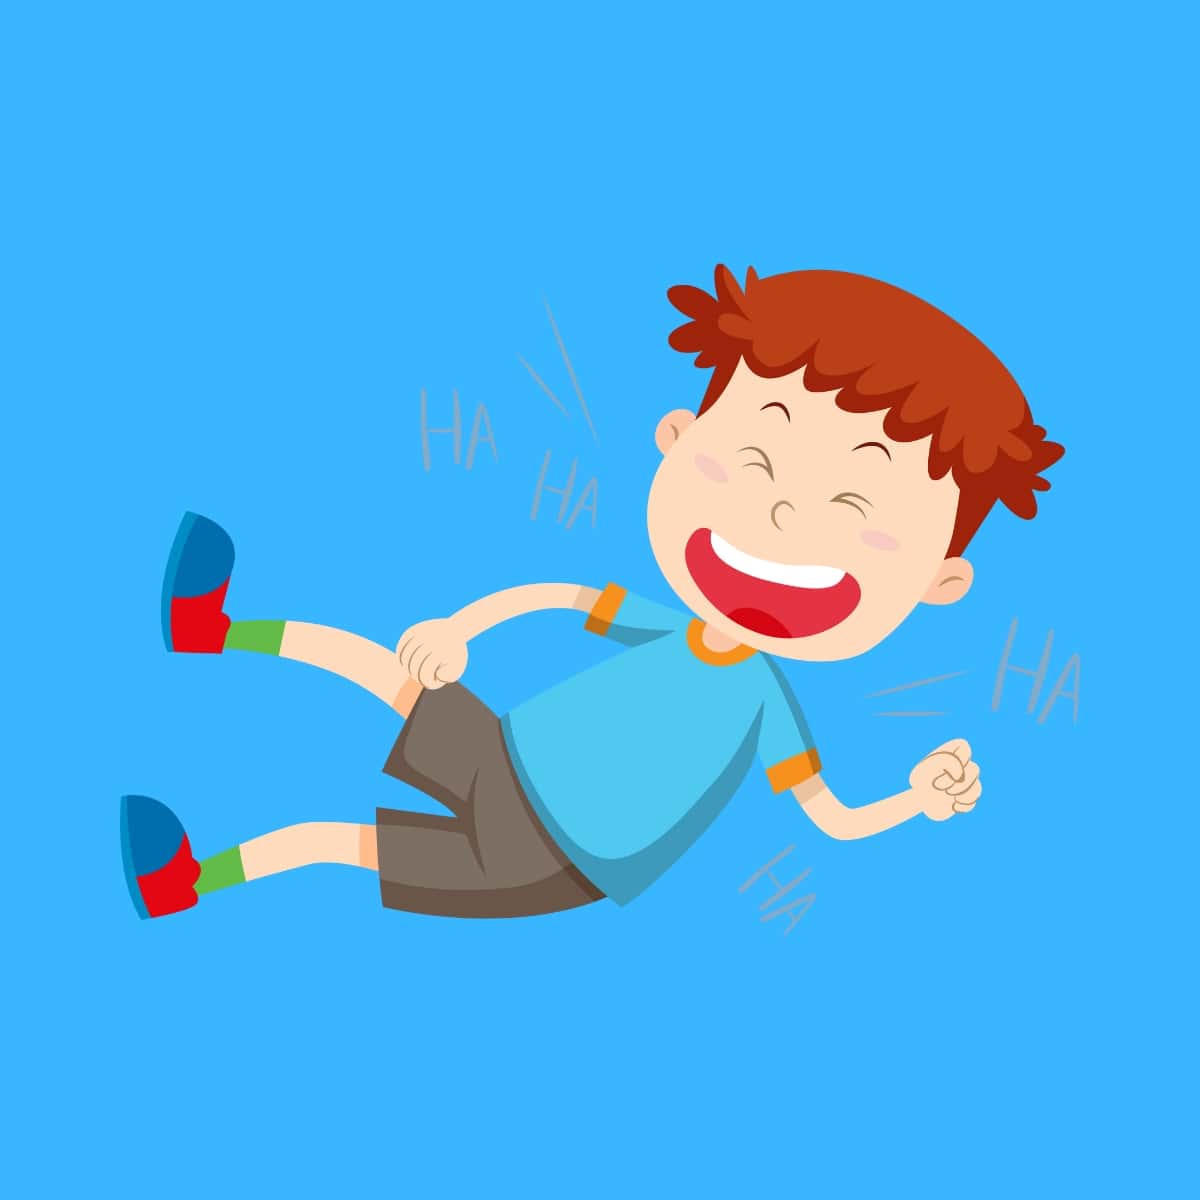 Cartoon graphic of a boy laughing at funny jokes while lying on the ground on a blue background.